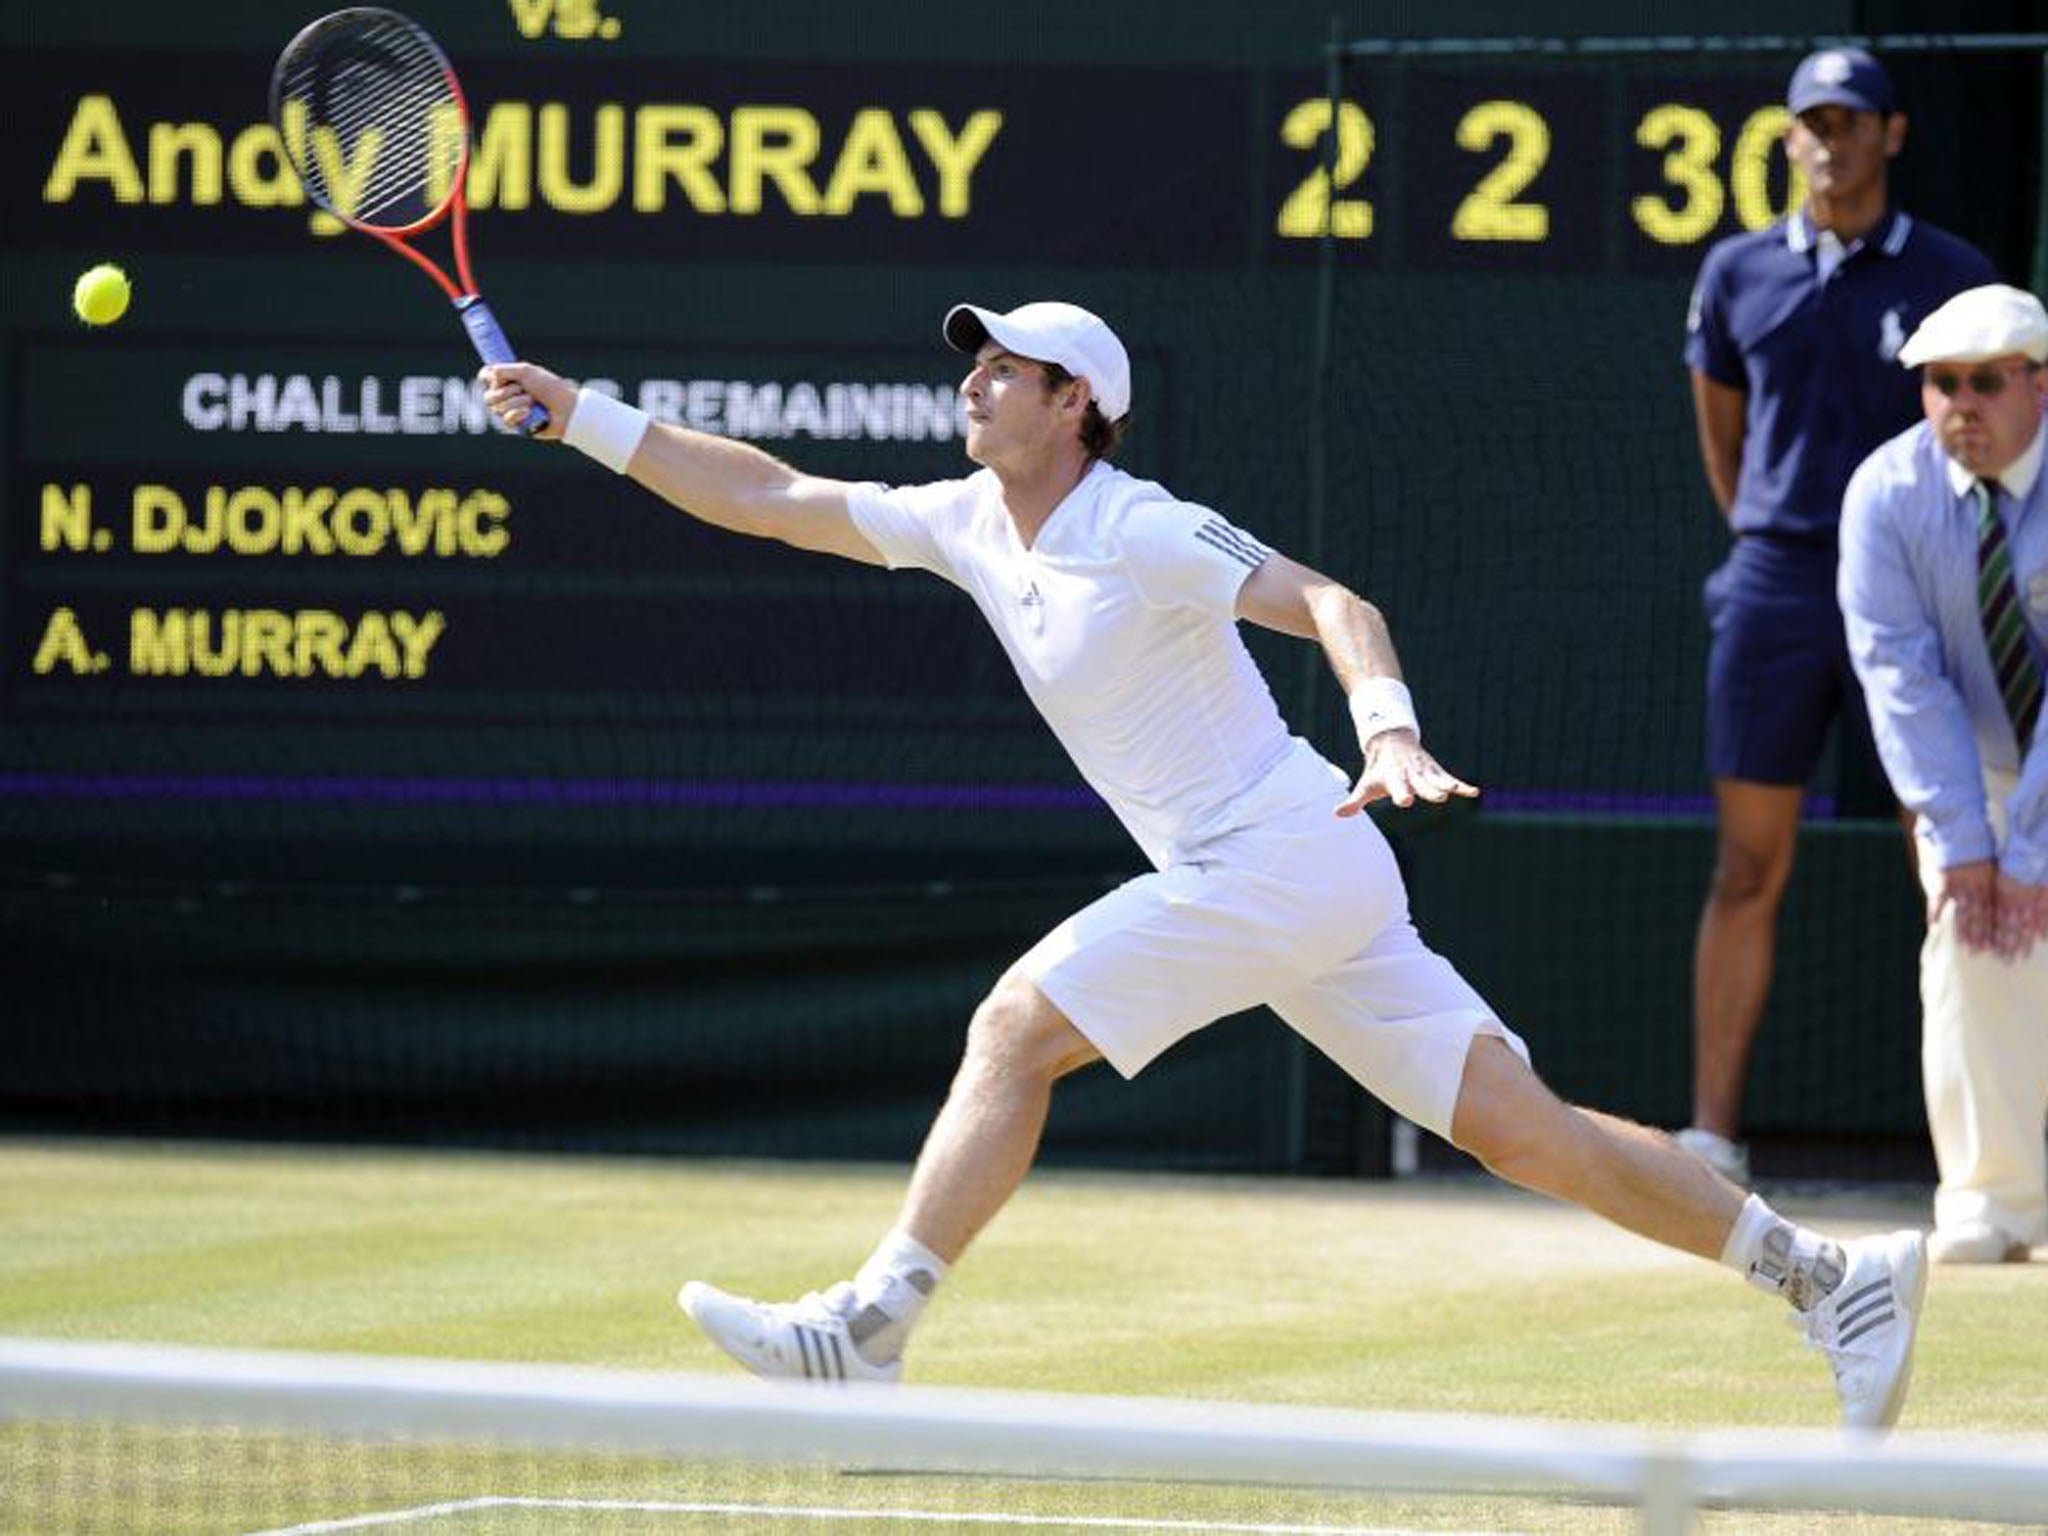 Murray is the most successful British man in terms of Grand Slam match wins with 113, ahead of Fred Perry on 106 (Gerry Penny/EPA)